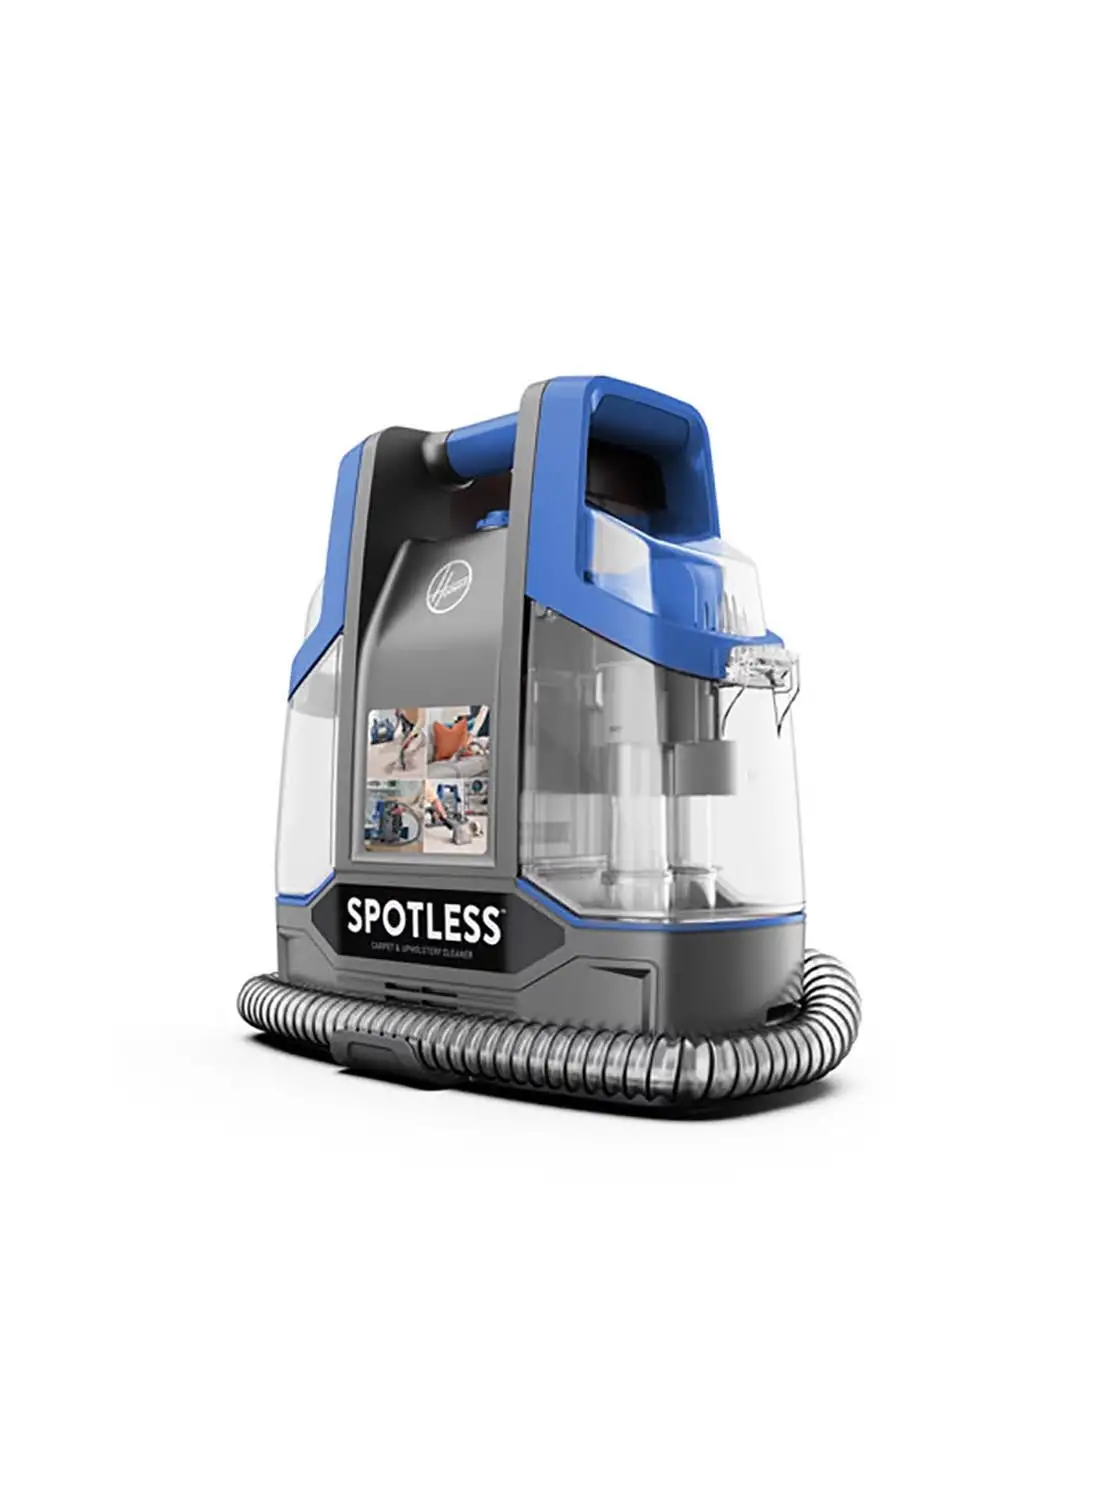 HOOVER Spotless Clean Portable Lightweight Carpet & Upholstery Multi Surfaces Cleaner For Car Seats, Sofa, Kitchen, Outdoor & More, Removes Spots Spills & Tough Stains 2.6 L 400 W CDCW-CSME Blue/Grey